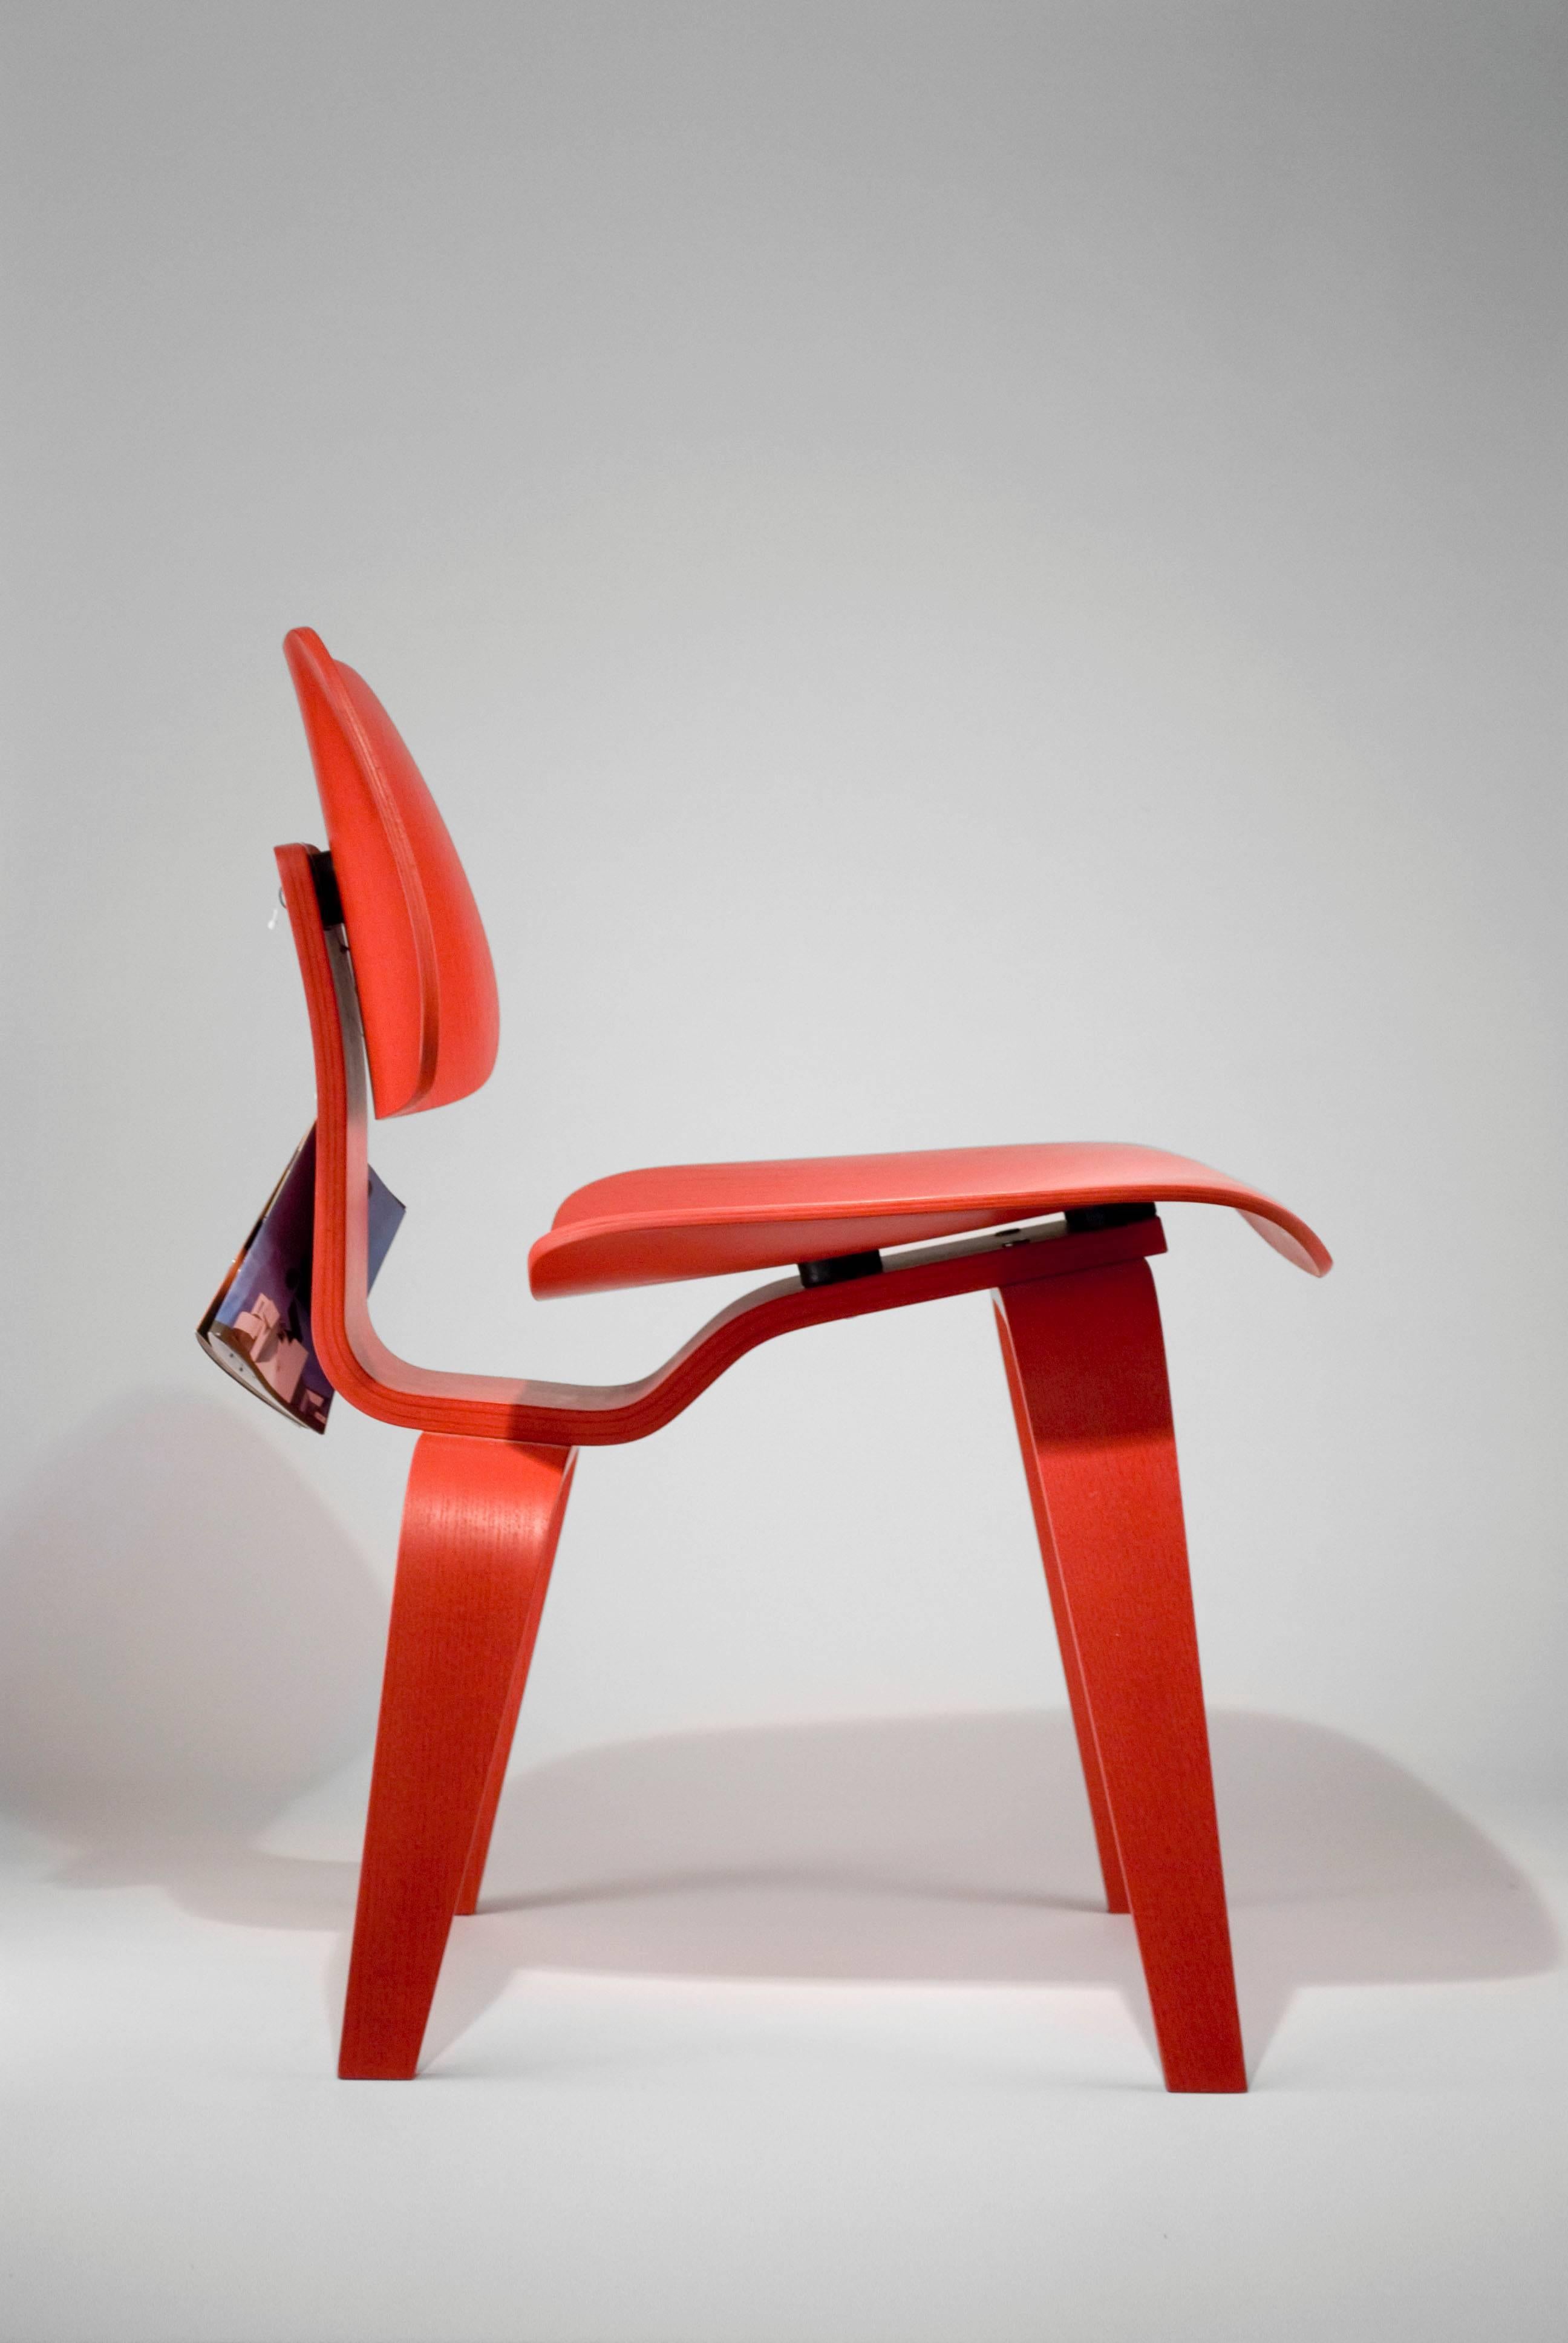 An icon of American design, one of the most recognized chair designs in the world today. Authentic and brand new with original hang tag. Produced in 2002. Vitra still produces this chair for distribution in Europe although this color in the DCW is